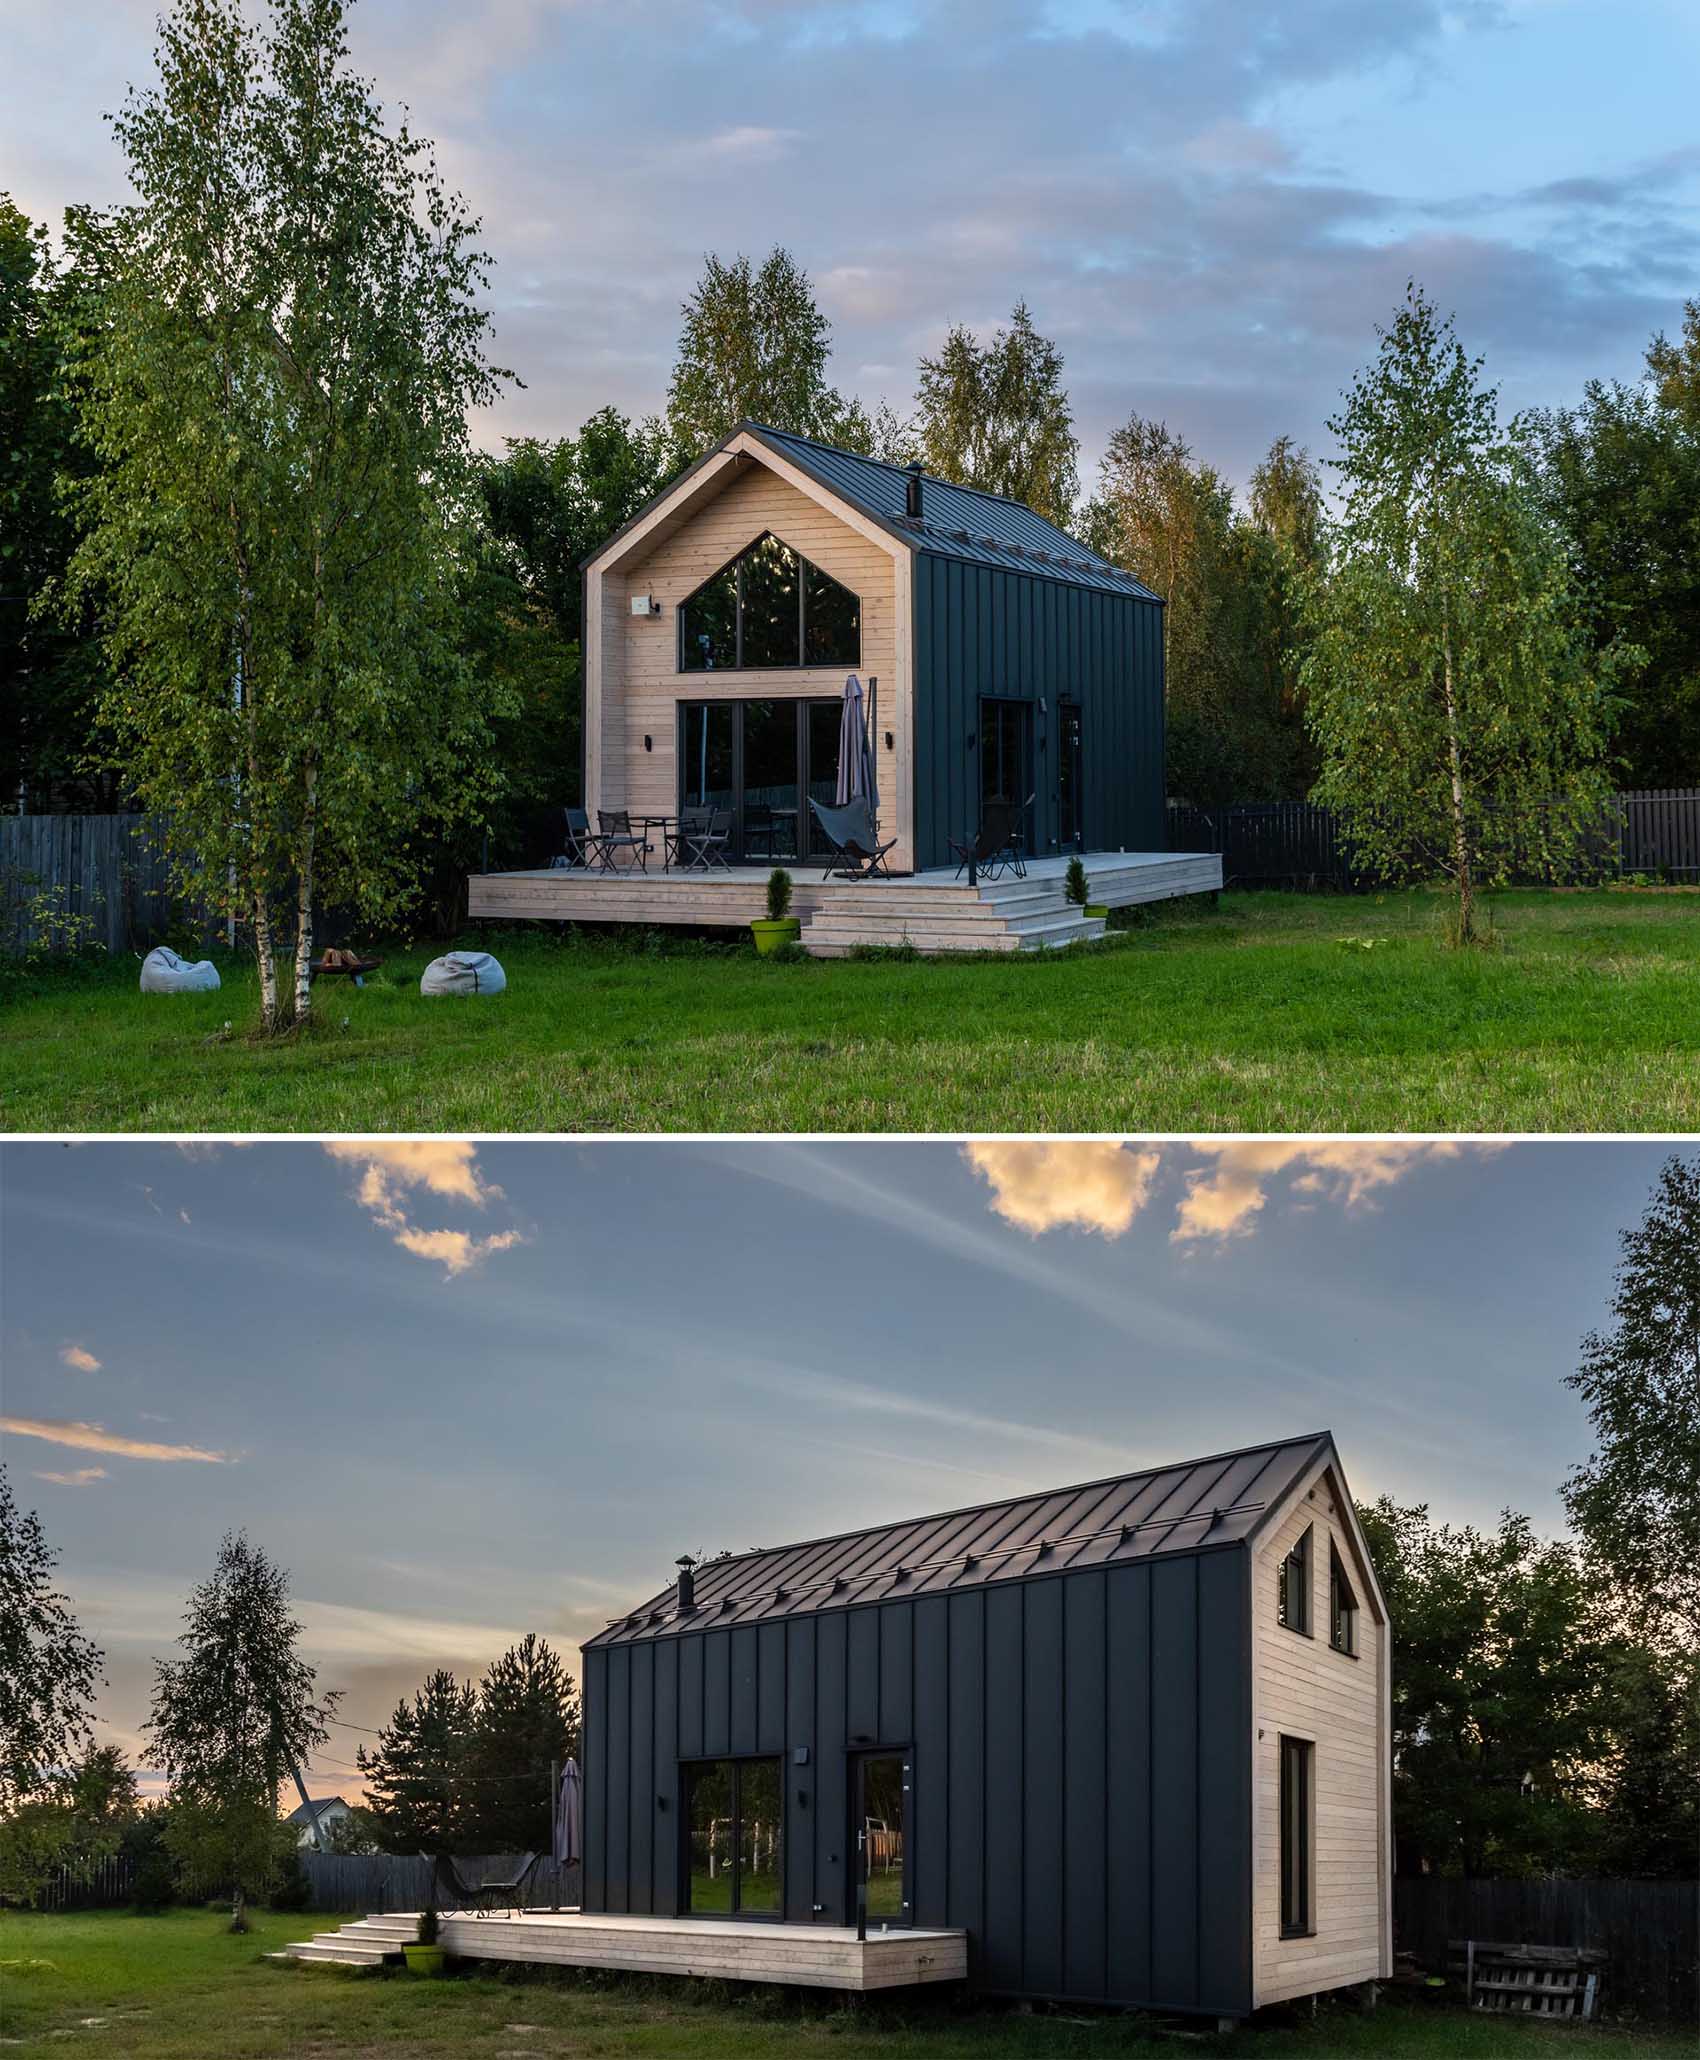 A modern barn-inspired home with a black metal exterior that's accented at each end with tongue and groove wood siding.